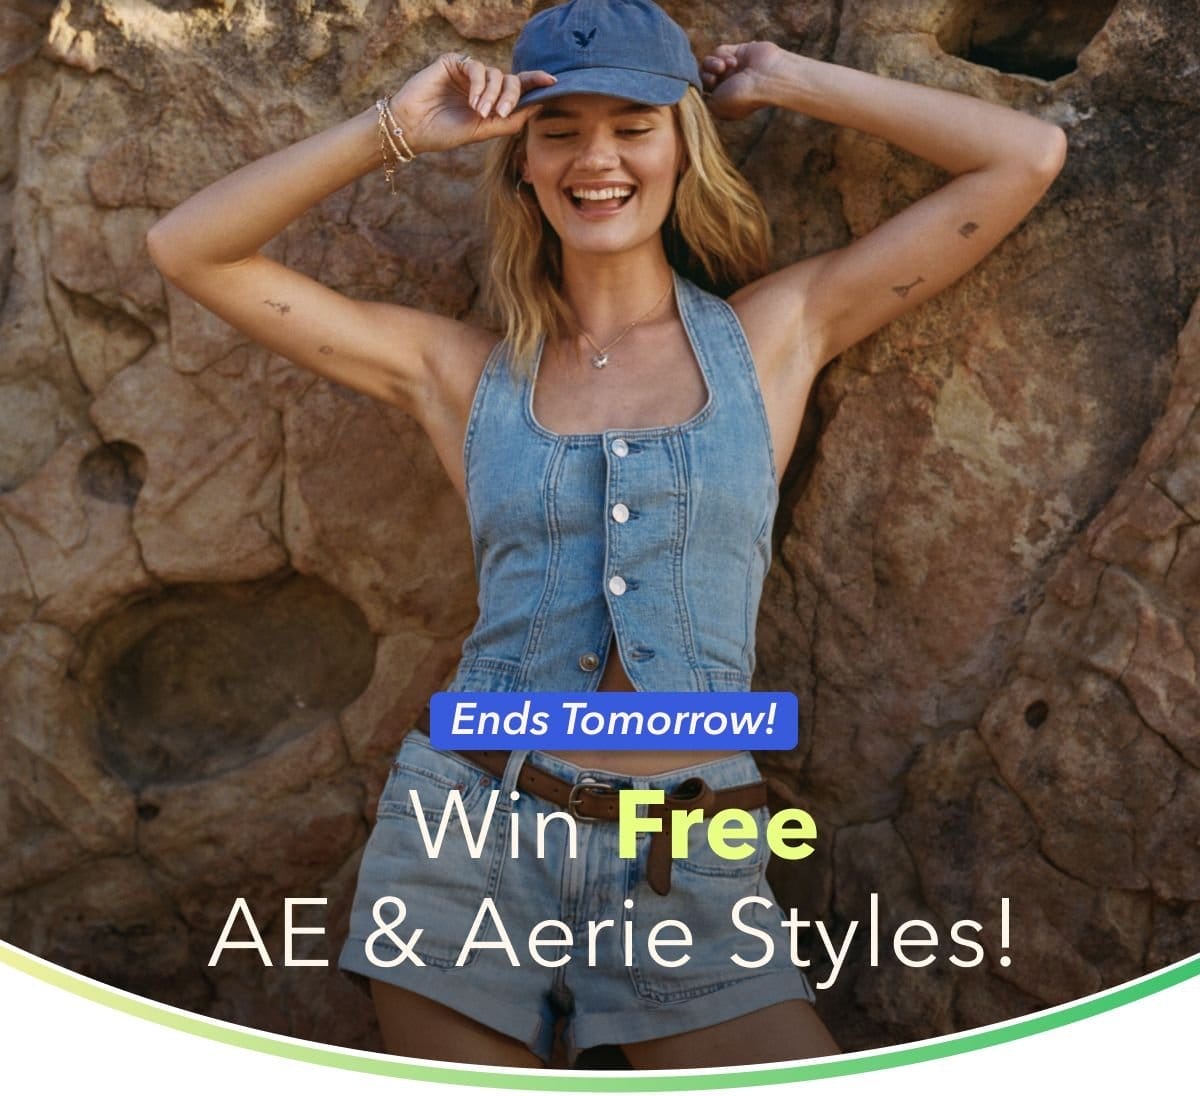 Ends Tomorrow! Win Free AE & Aerie Styles!